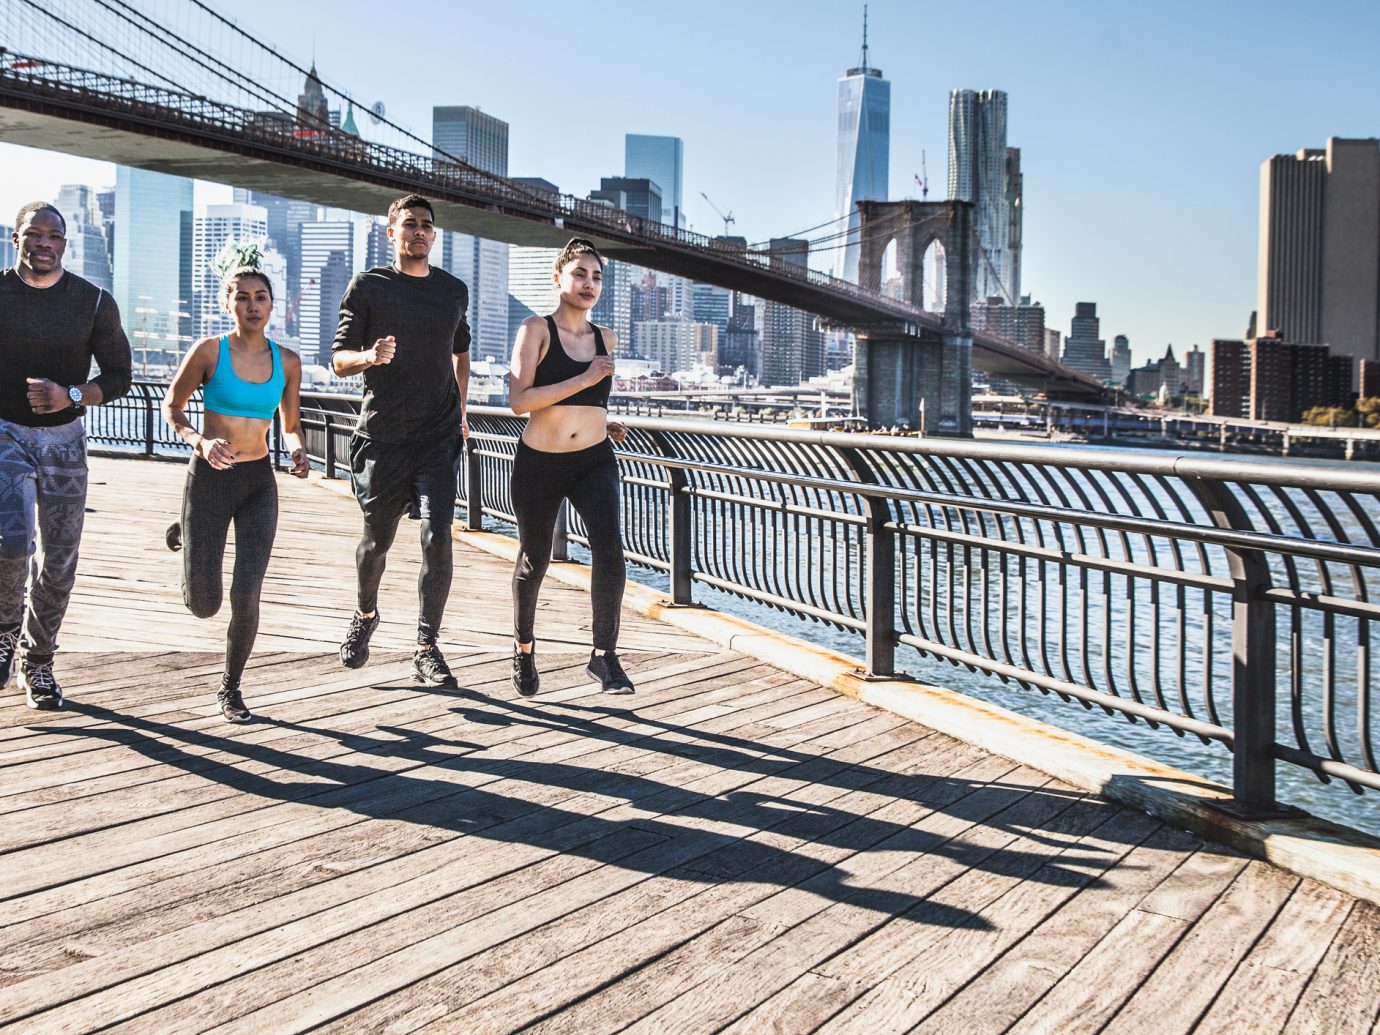 Group of healthy mixed race people running in DUMBO - New York City - USA. They are running in the city streets wearing professional sport clothes.